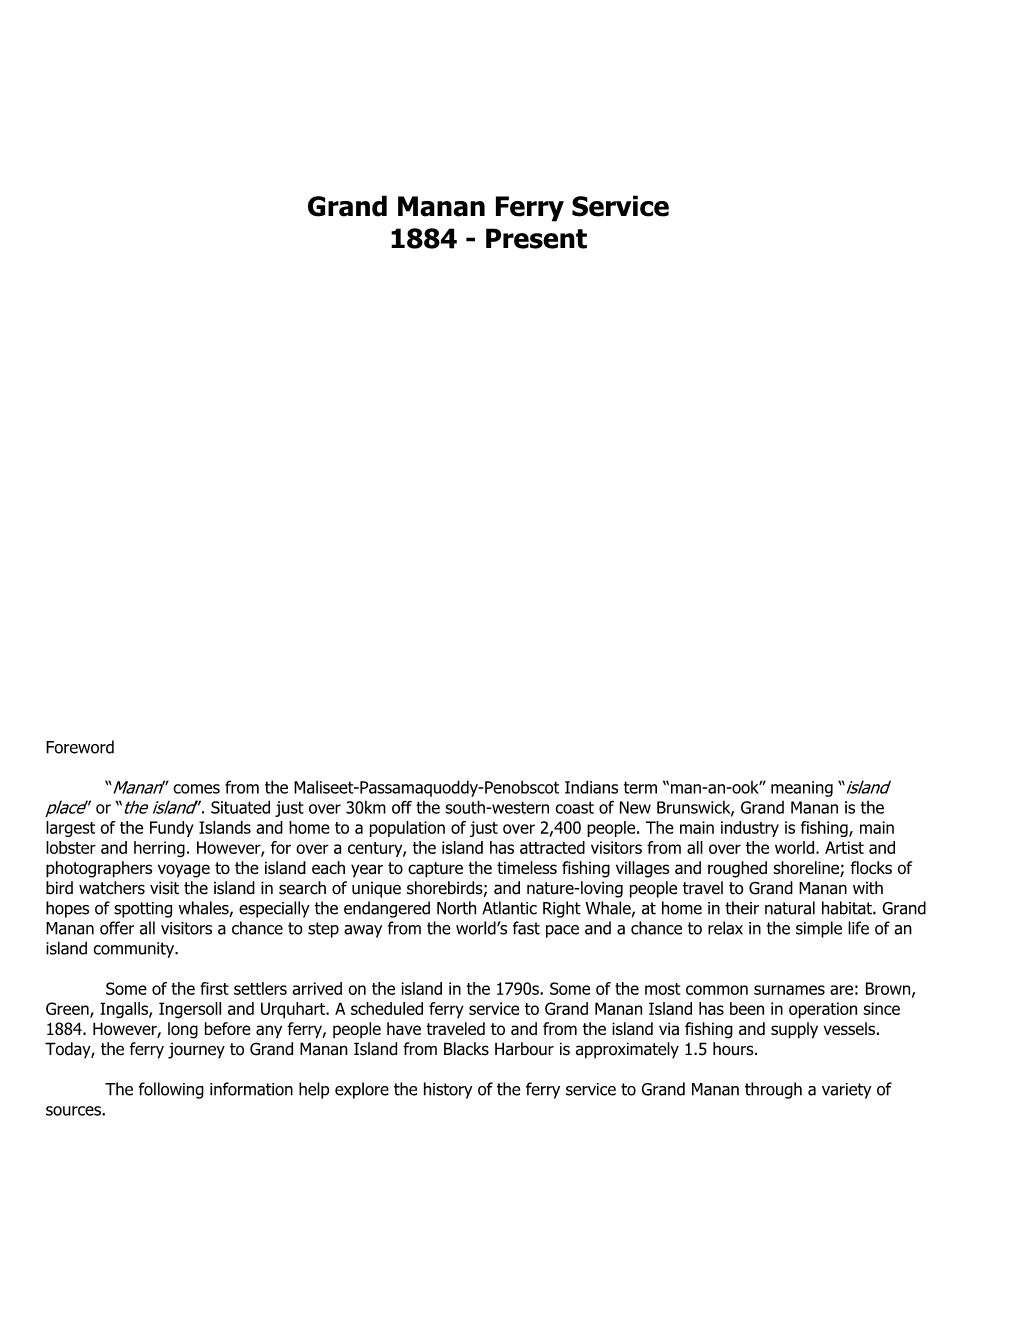 A Look at the Grand Manan Ferry Service